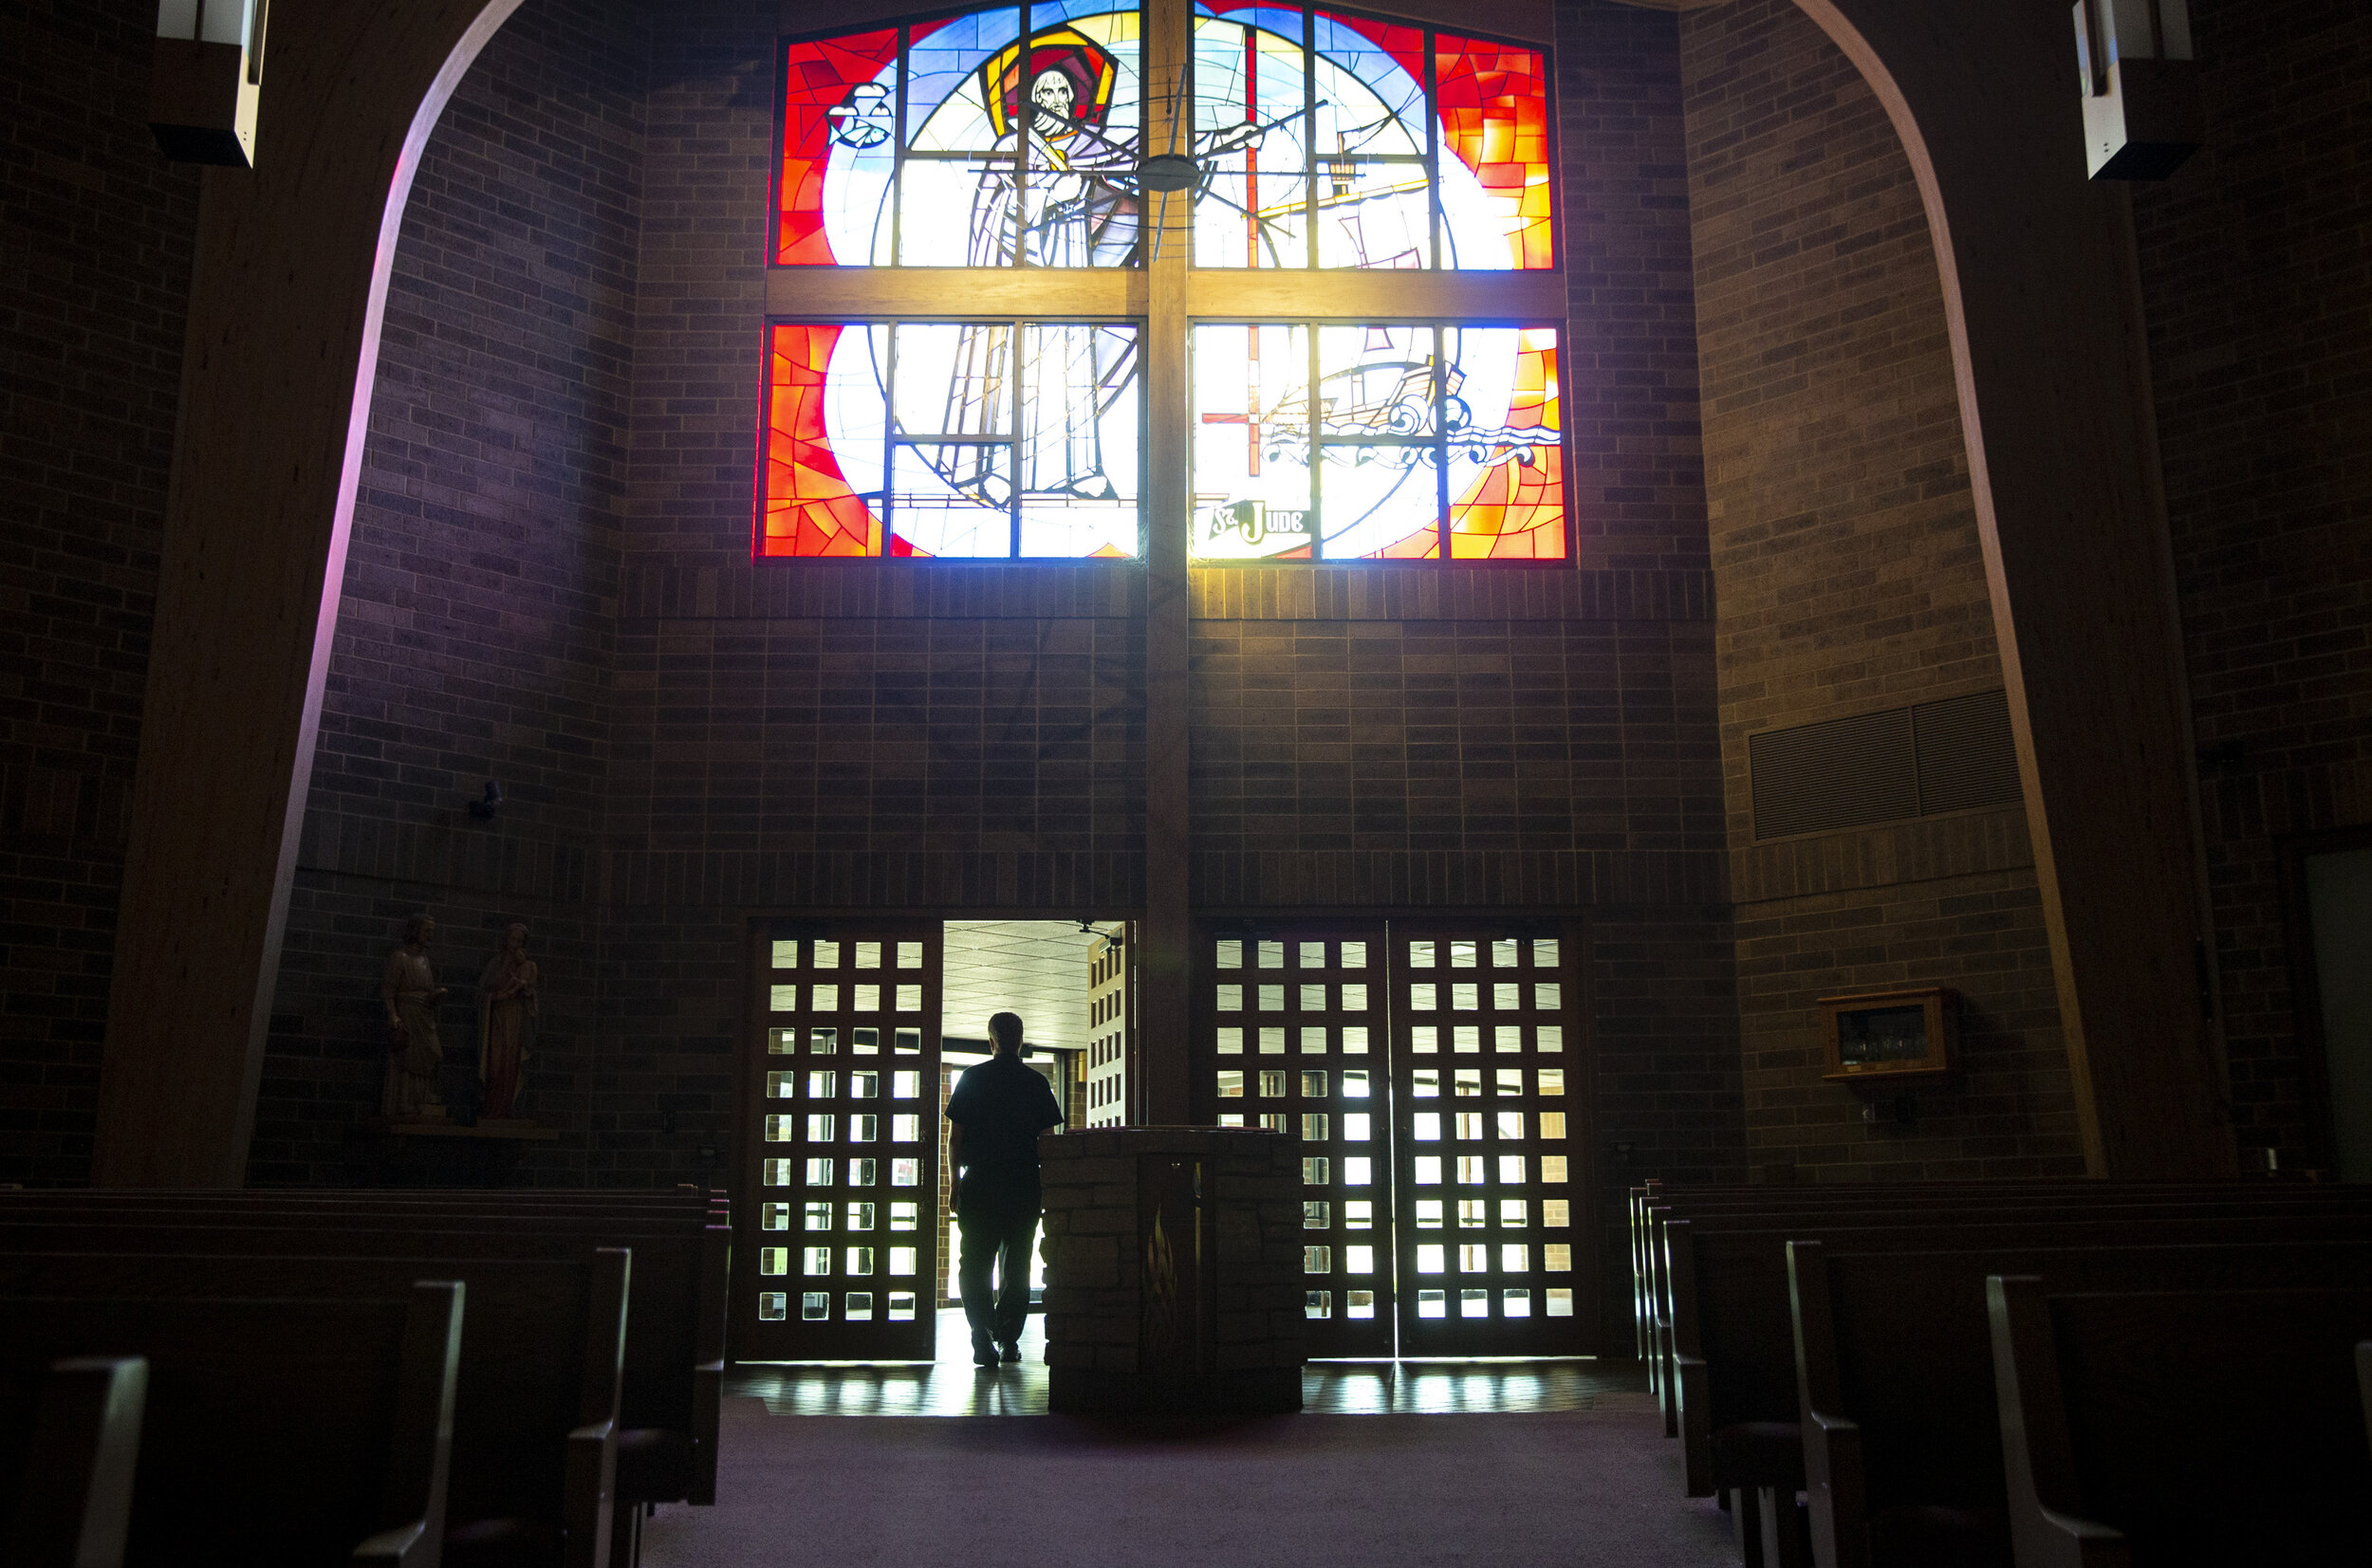  Rev. Mark Murphy walks out of the sanctuary back to his office before recording mass at St. Jude’s Catholic Church on Saturday.  